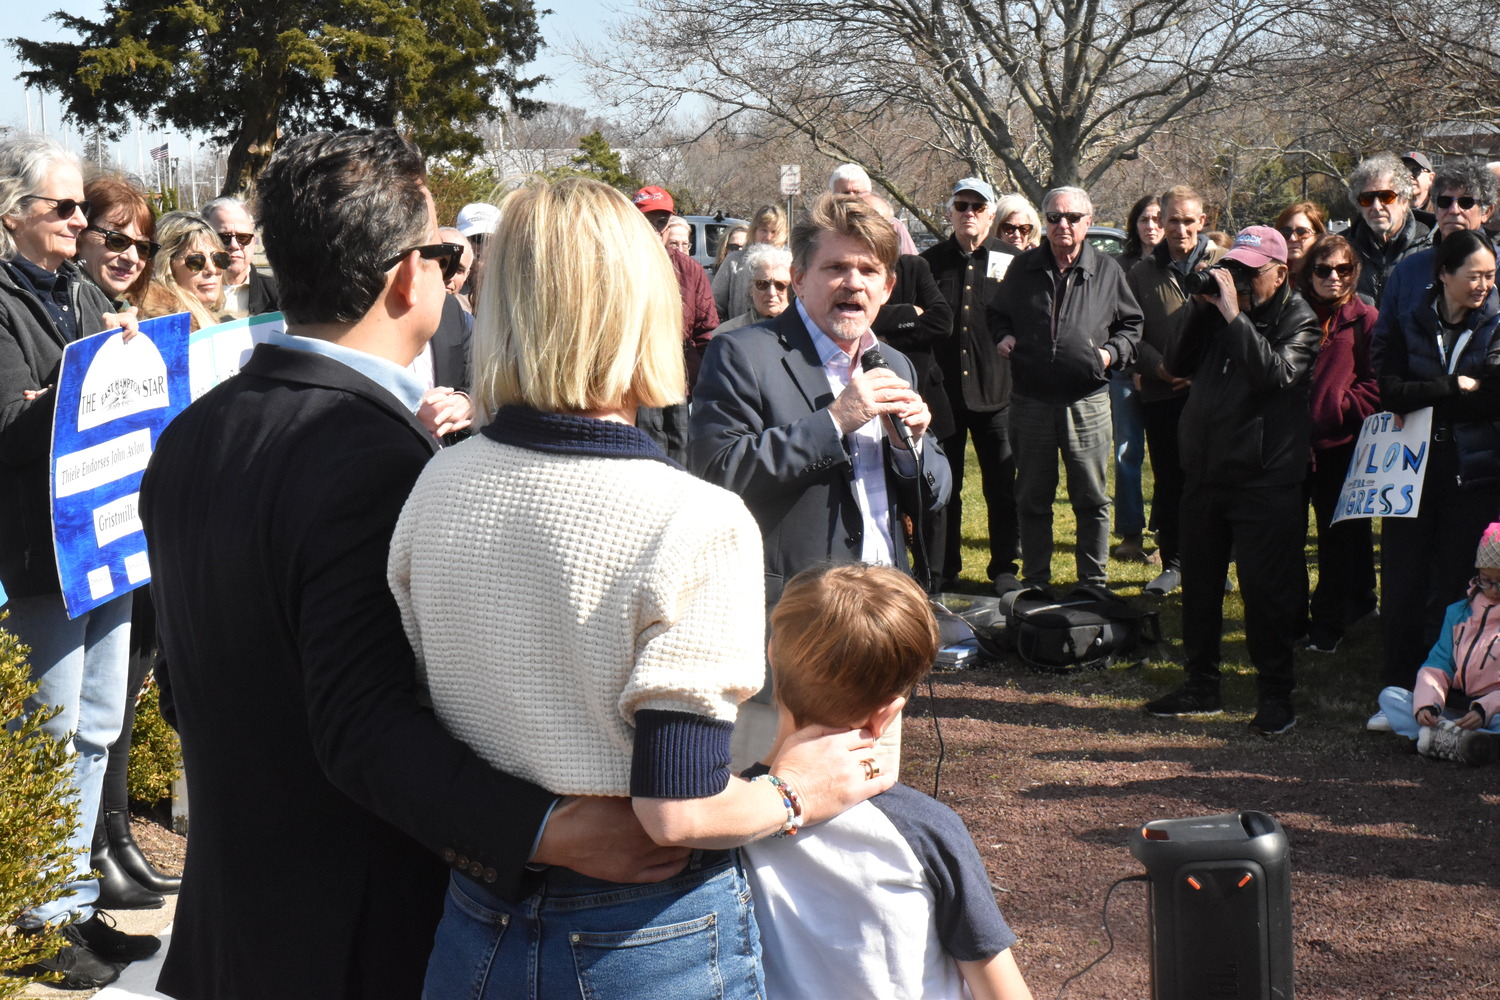 Southampton Town Councilman Tommy John Schiavoni, who is running for the State Assembly, speaks while congressional candidate John Avlon and his family look on. STEPHEN J. KOTZ